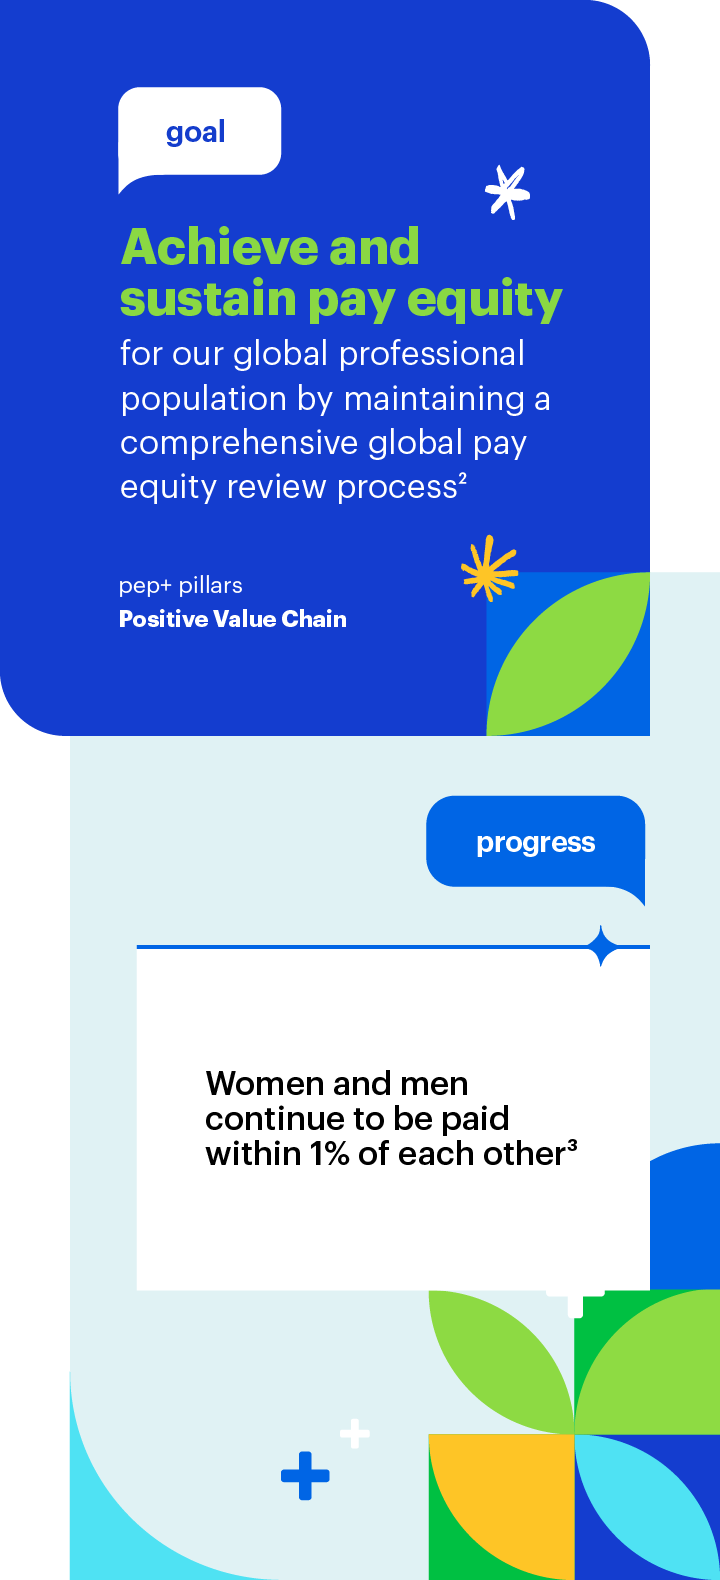 Goal: Achieve and sustain pay equity for our global professional population by maintaining a comprehensive global pay equity review process